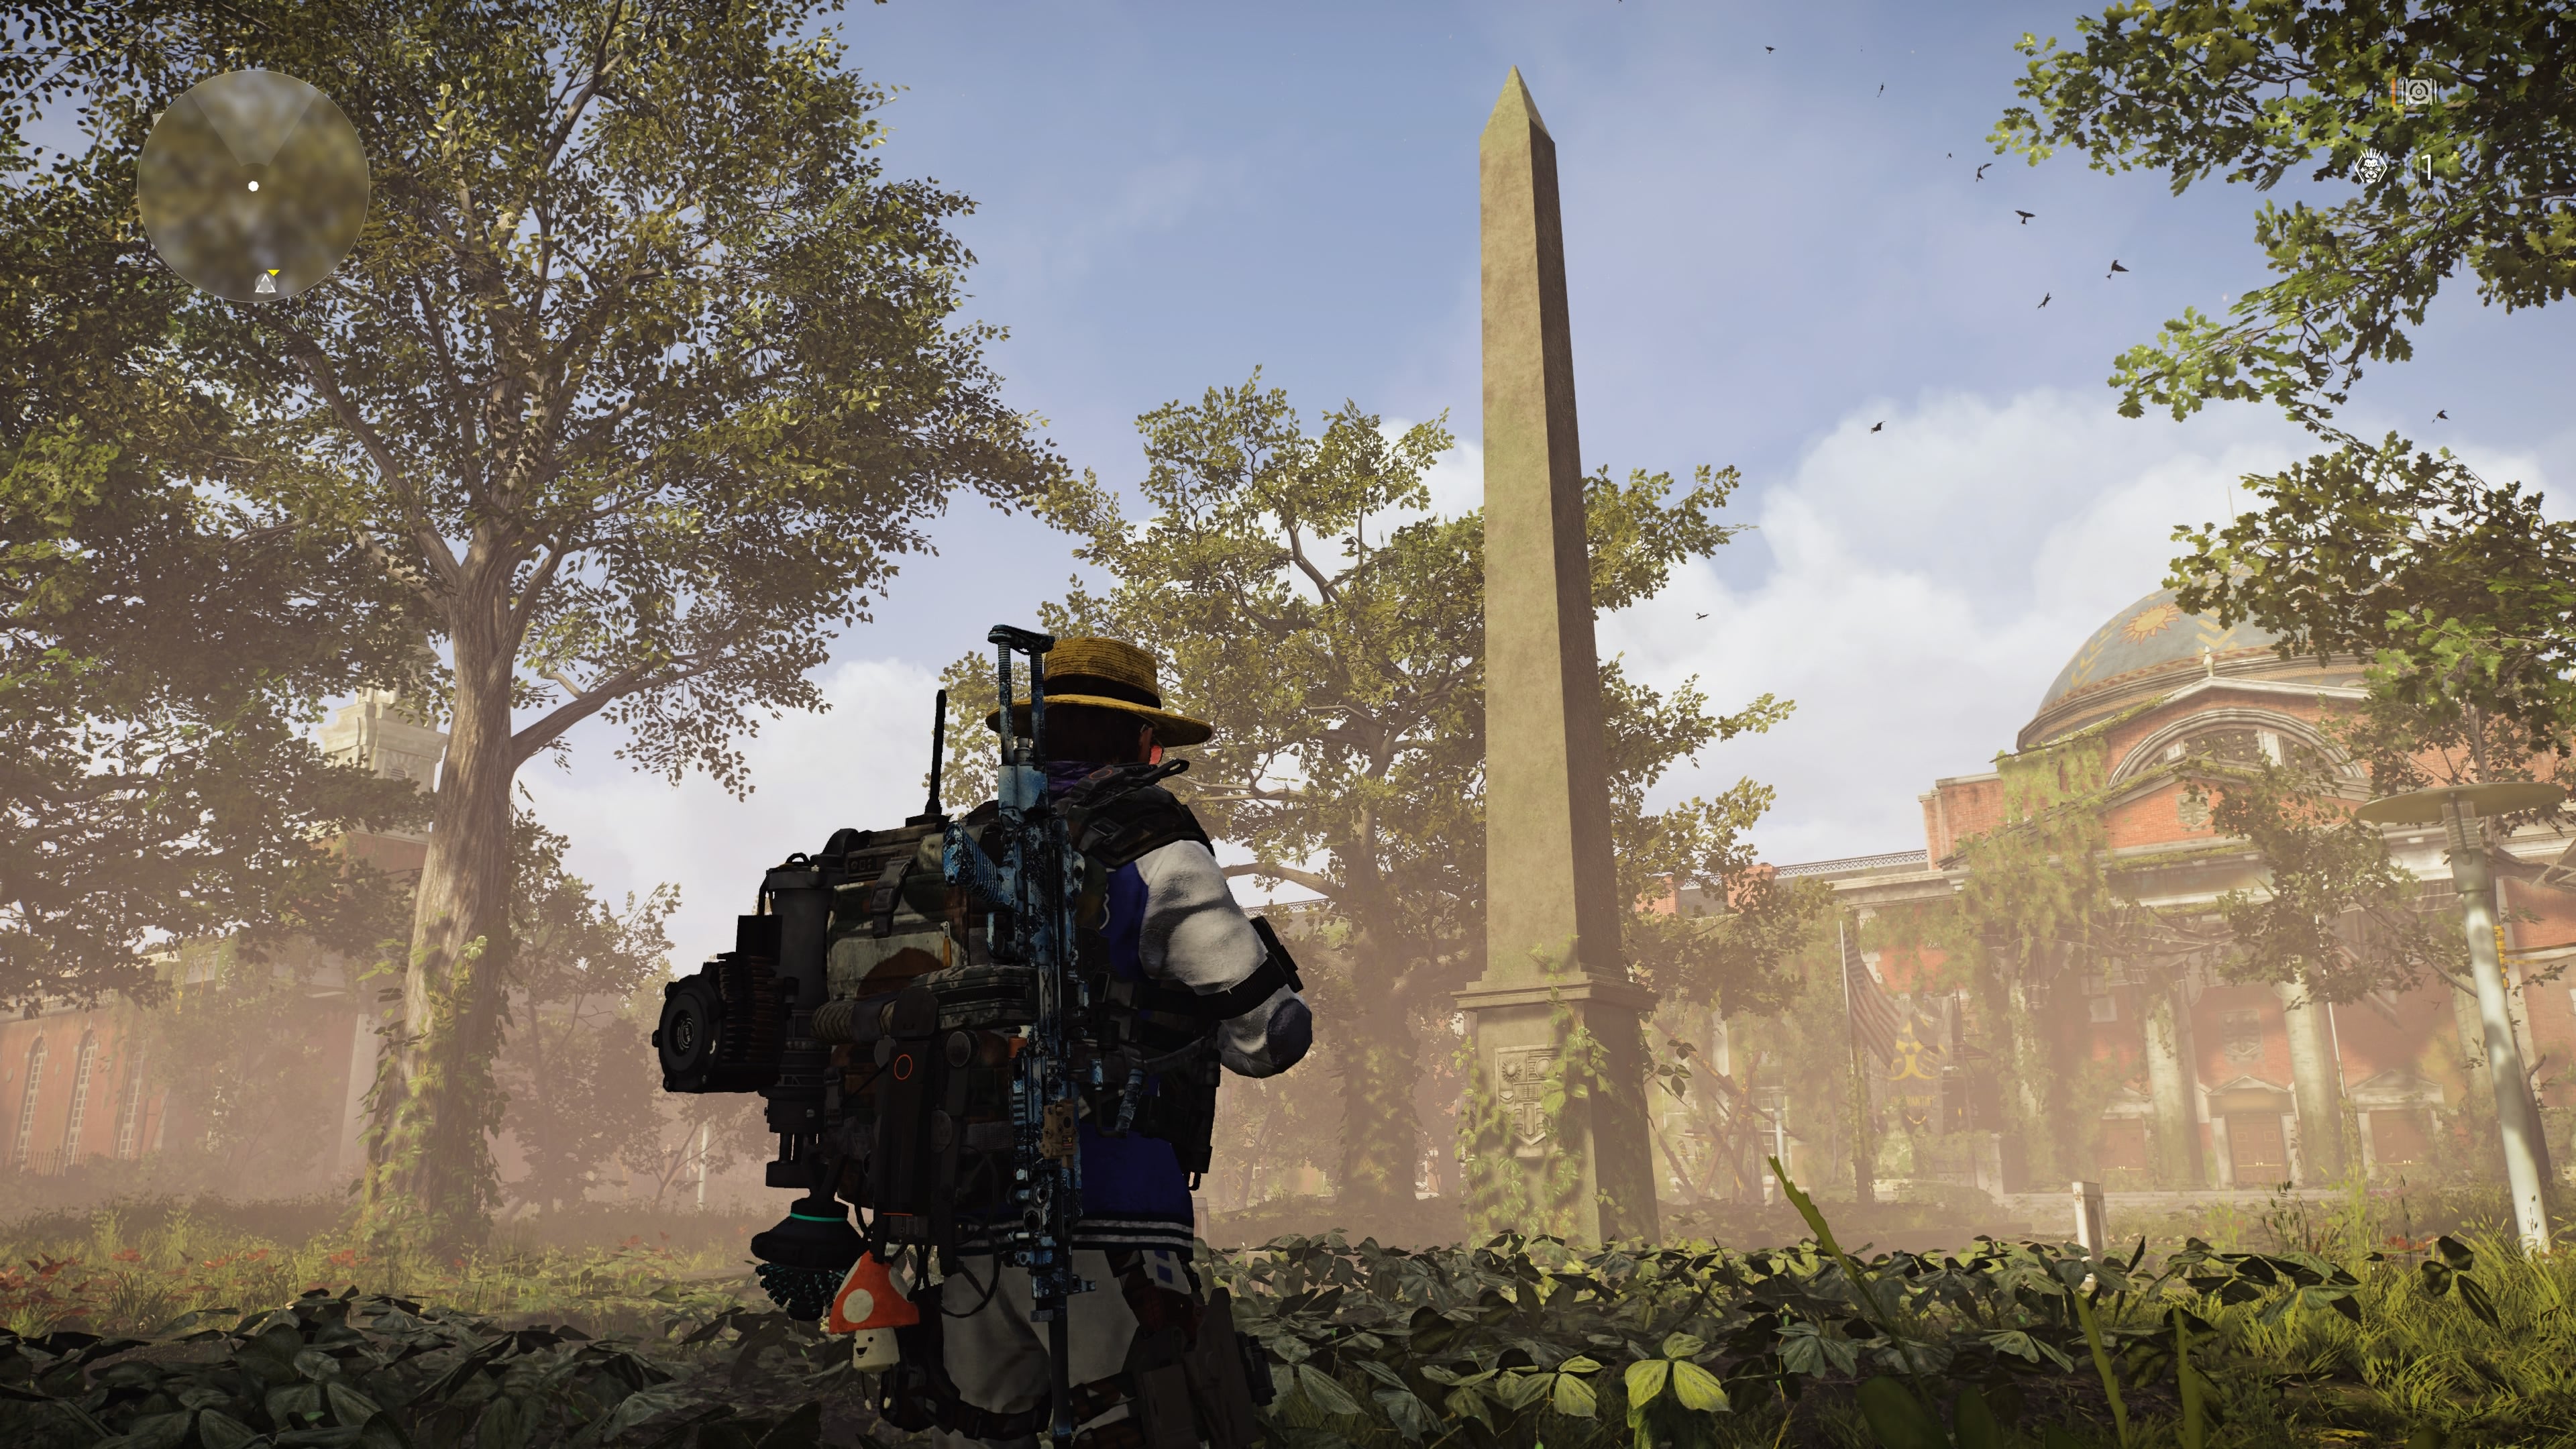 An Investigation Into Whether Two Statues In The Division 2 Appear To Be Having Sex